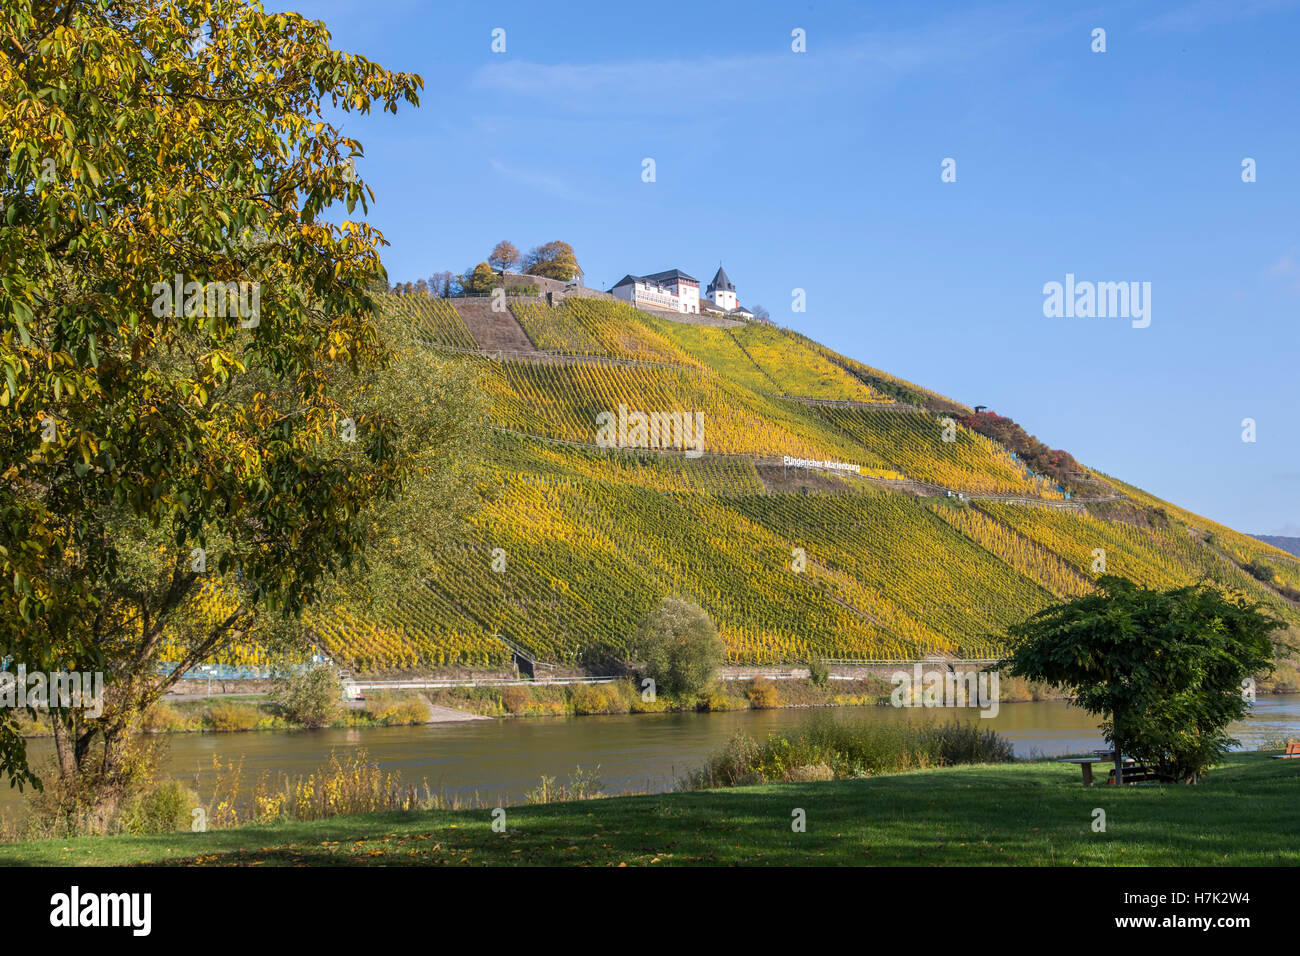 Moselle river, near Pünderich, Moselle valley, Germany Stock Photo